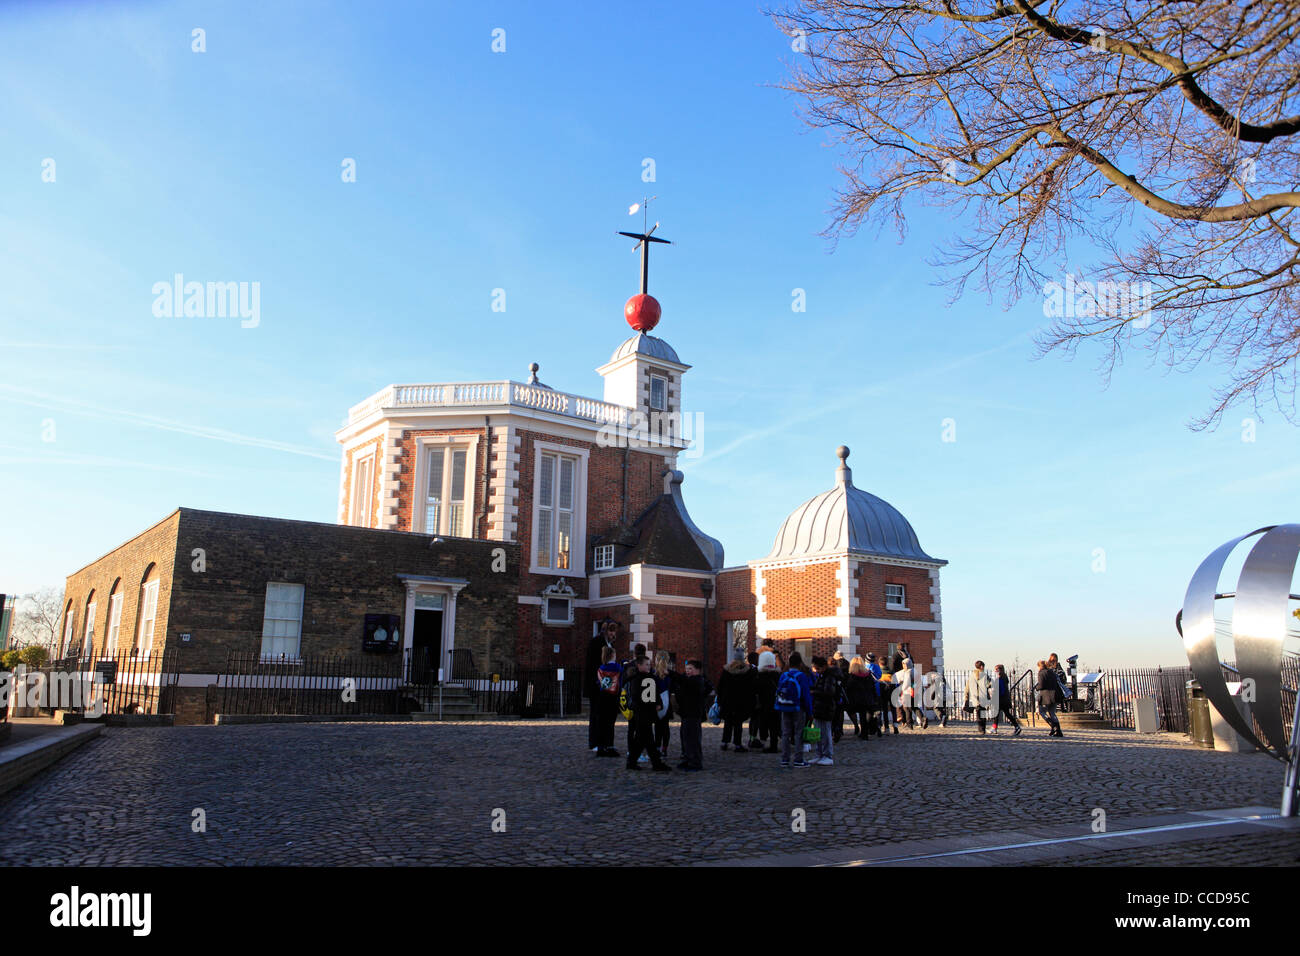 Regno Unito South London Greenwich royal Observatory di Flamsteed house Foto Stock